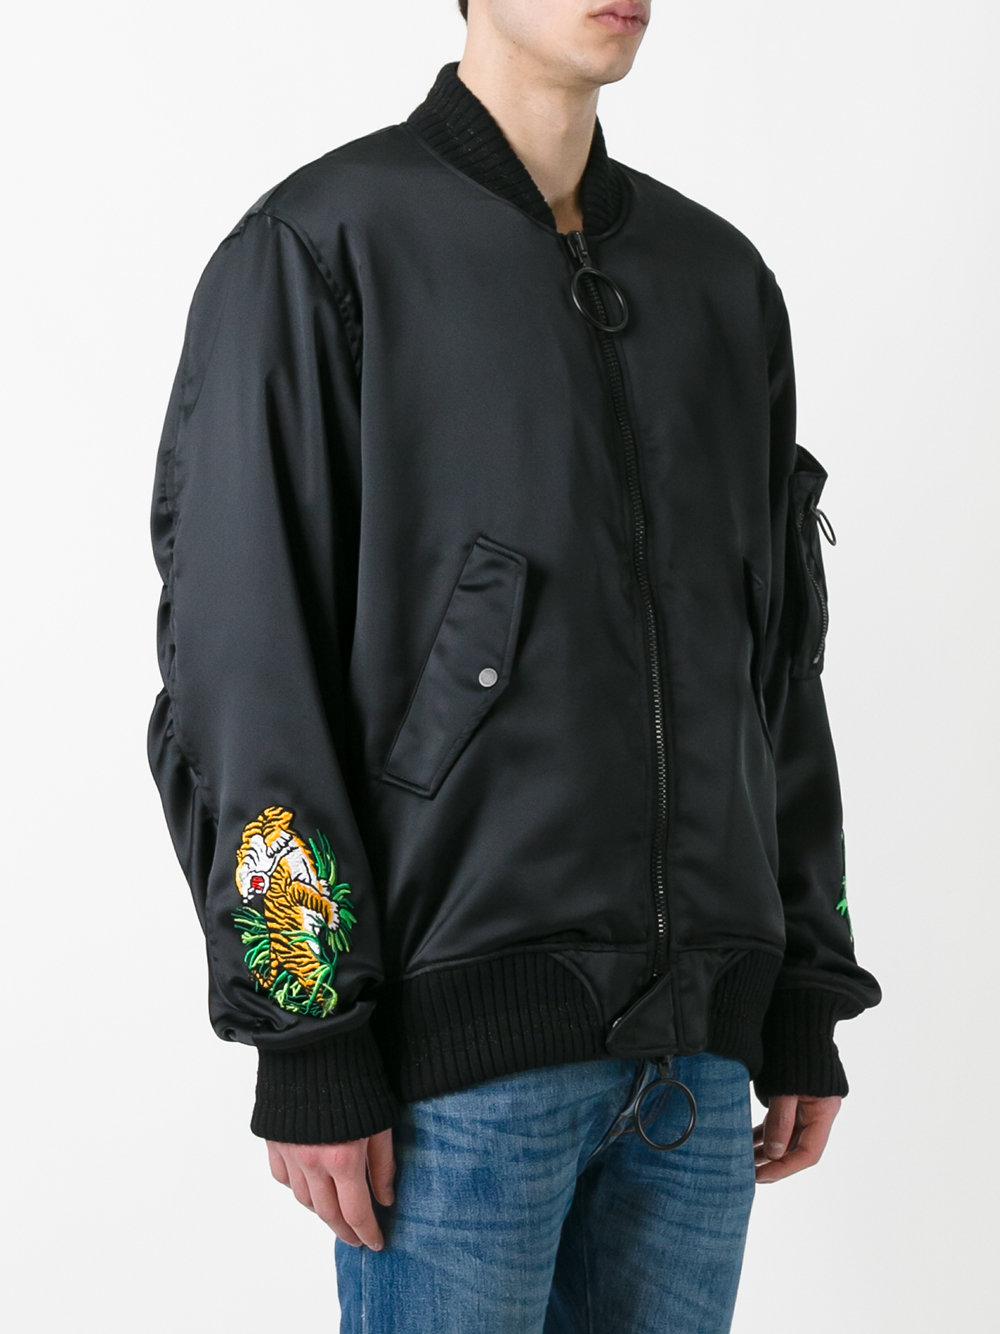 Lyst - Off-White c/o Virgil Abloh Tiger Embroidered Bomber Jacket in ...